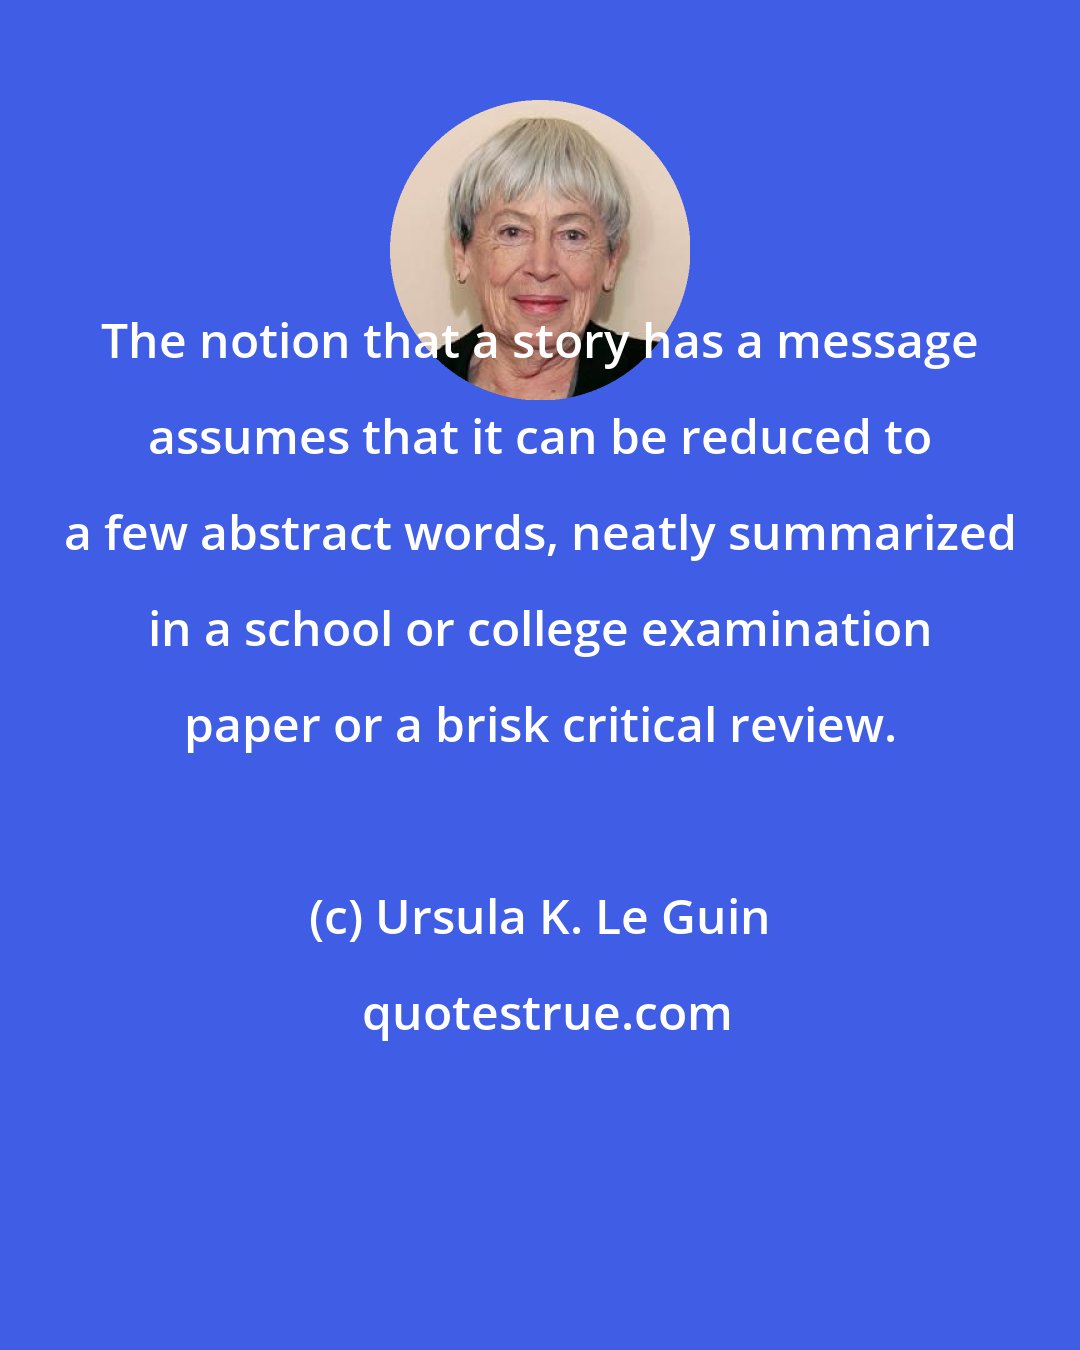 Ursula K. Le Guin: The notion that a story has a message assumes that it can be reduced to a few abstract words, neatly summarized in a school or college examination paper or a brisk critical review.